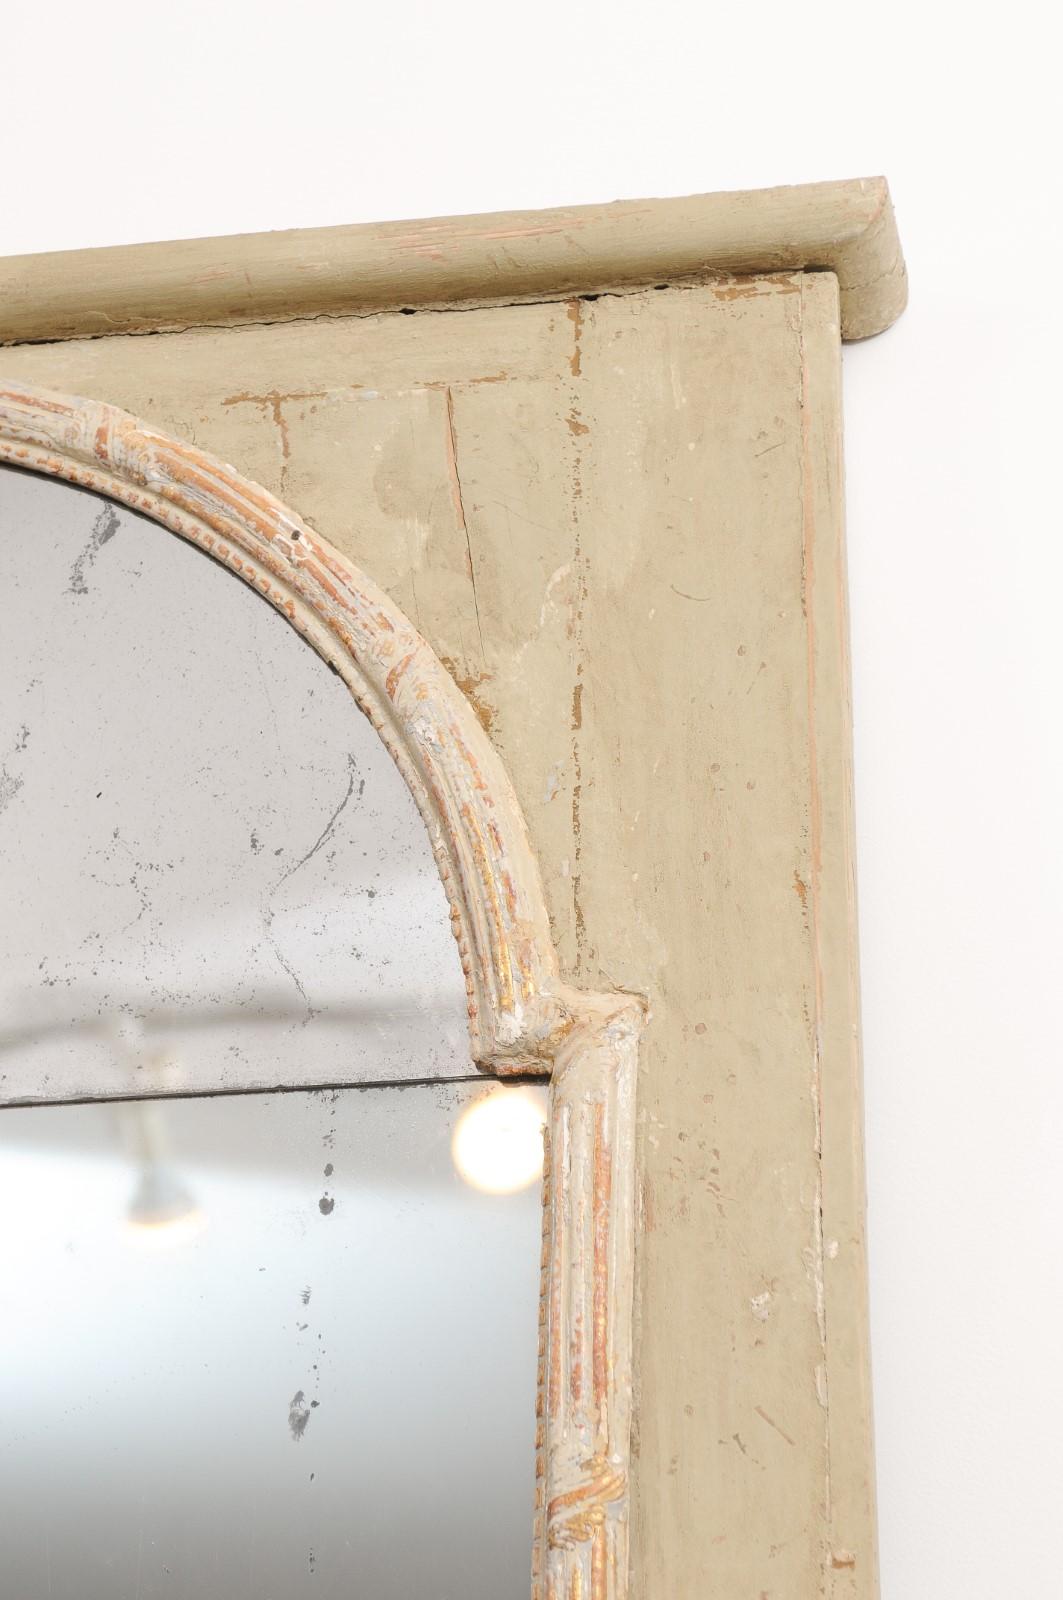 A French Régence period painted wood grand mirror from the early 18th century with broken arch motif. Created in France during the Régence that saw the transition of power between King Louis XIV and his great-grandson, King Louis XV, this mirror